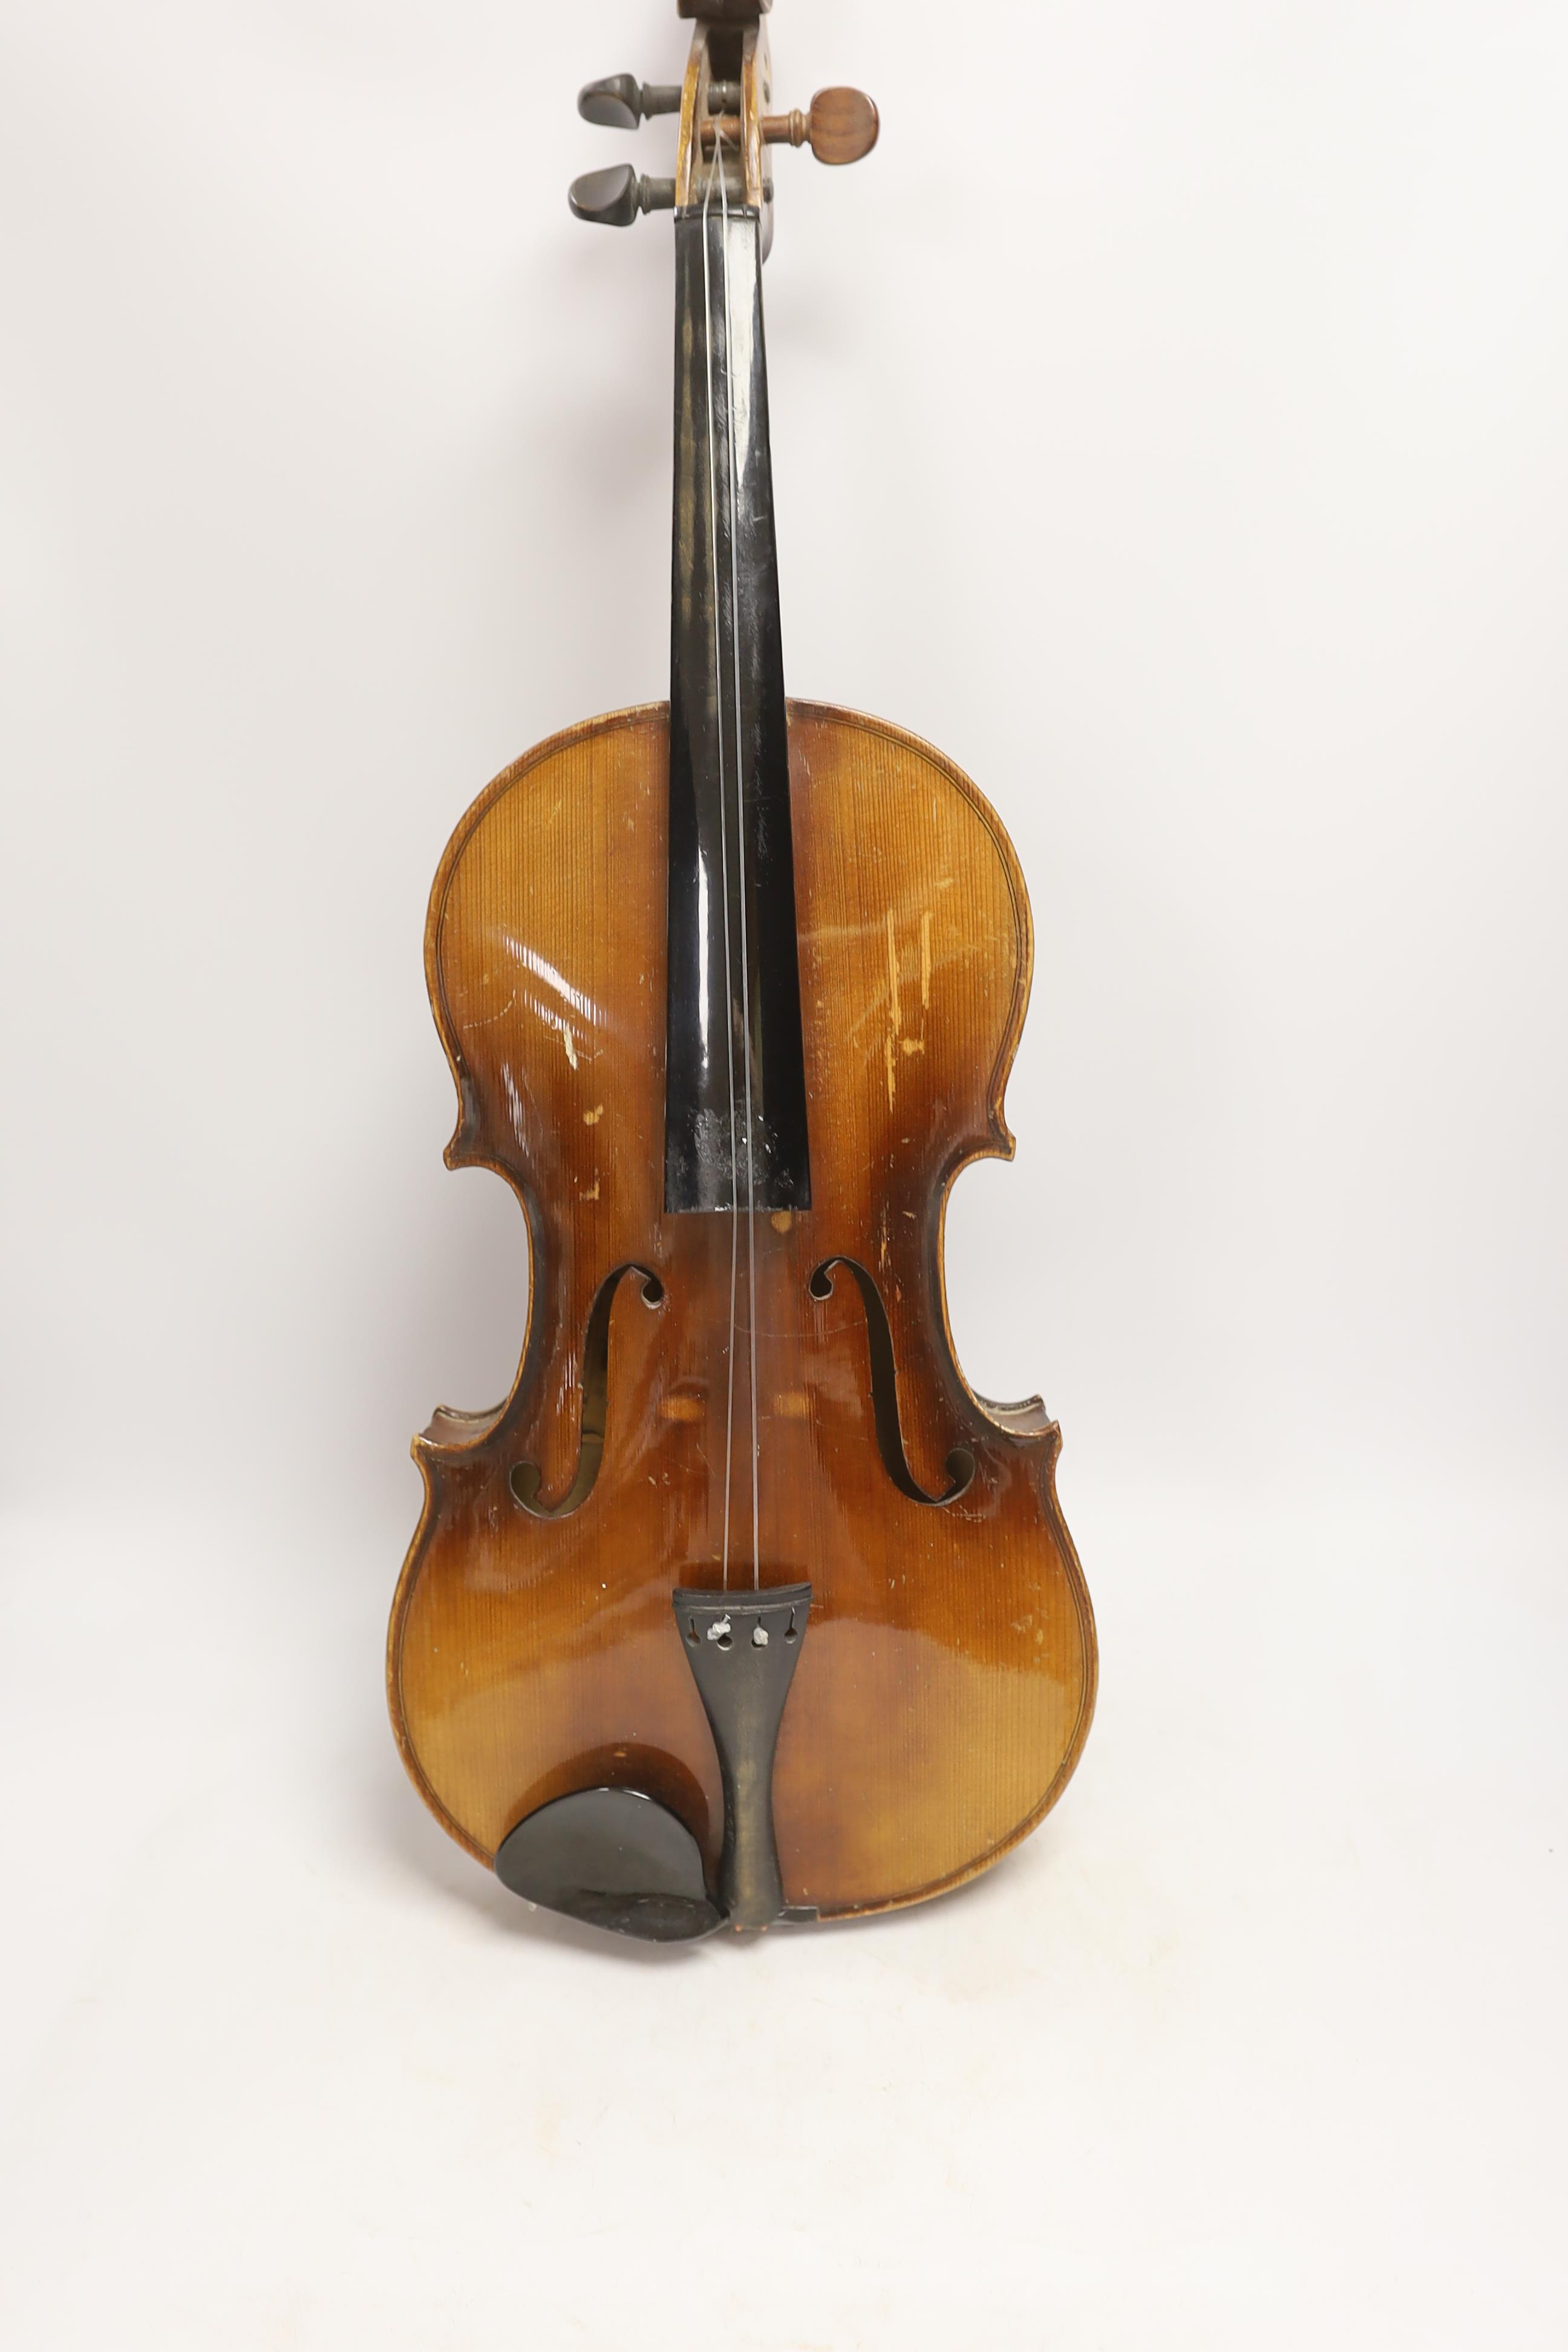 A German Strad violin, back measures 39.5cm, with bow